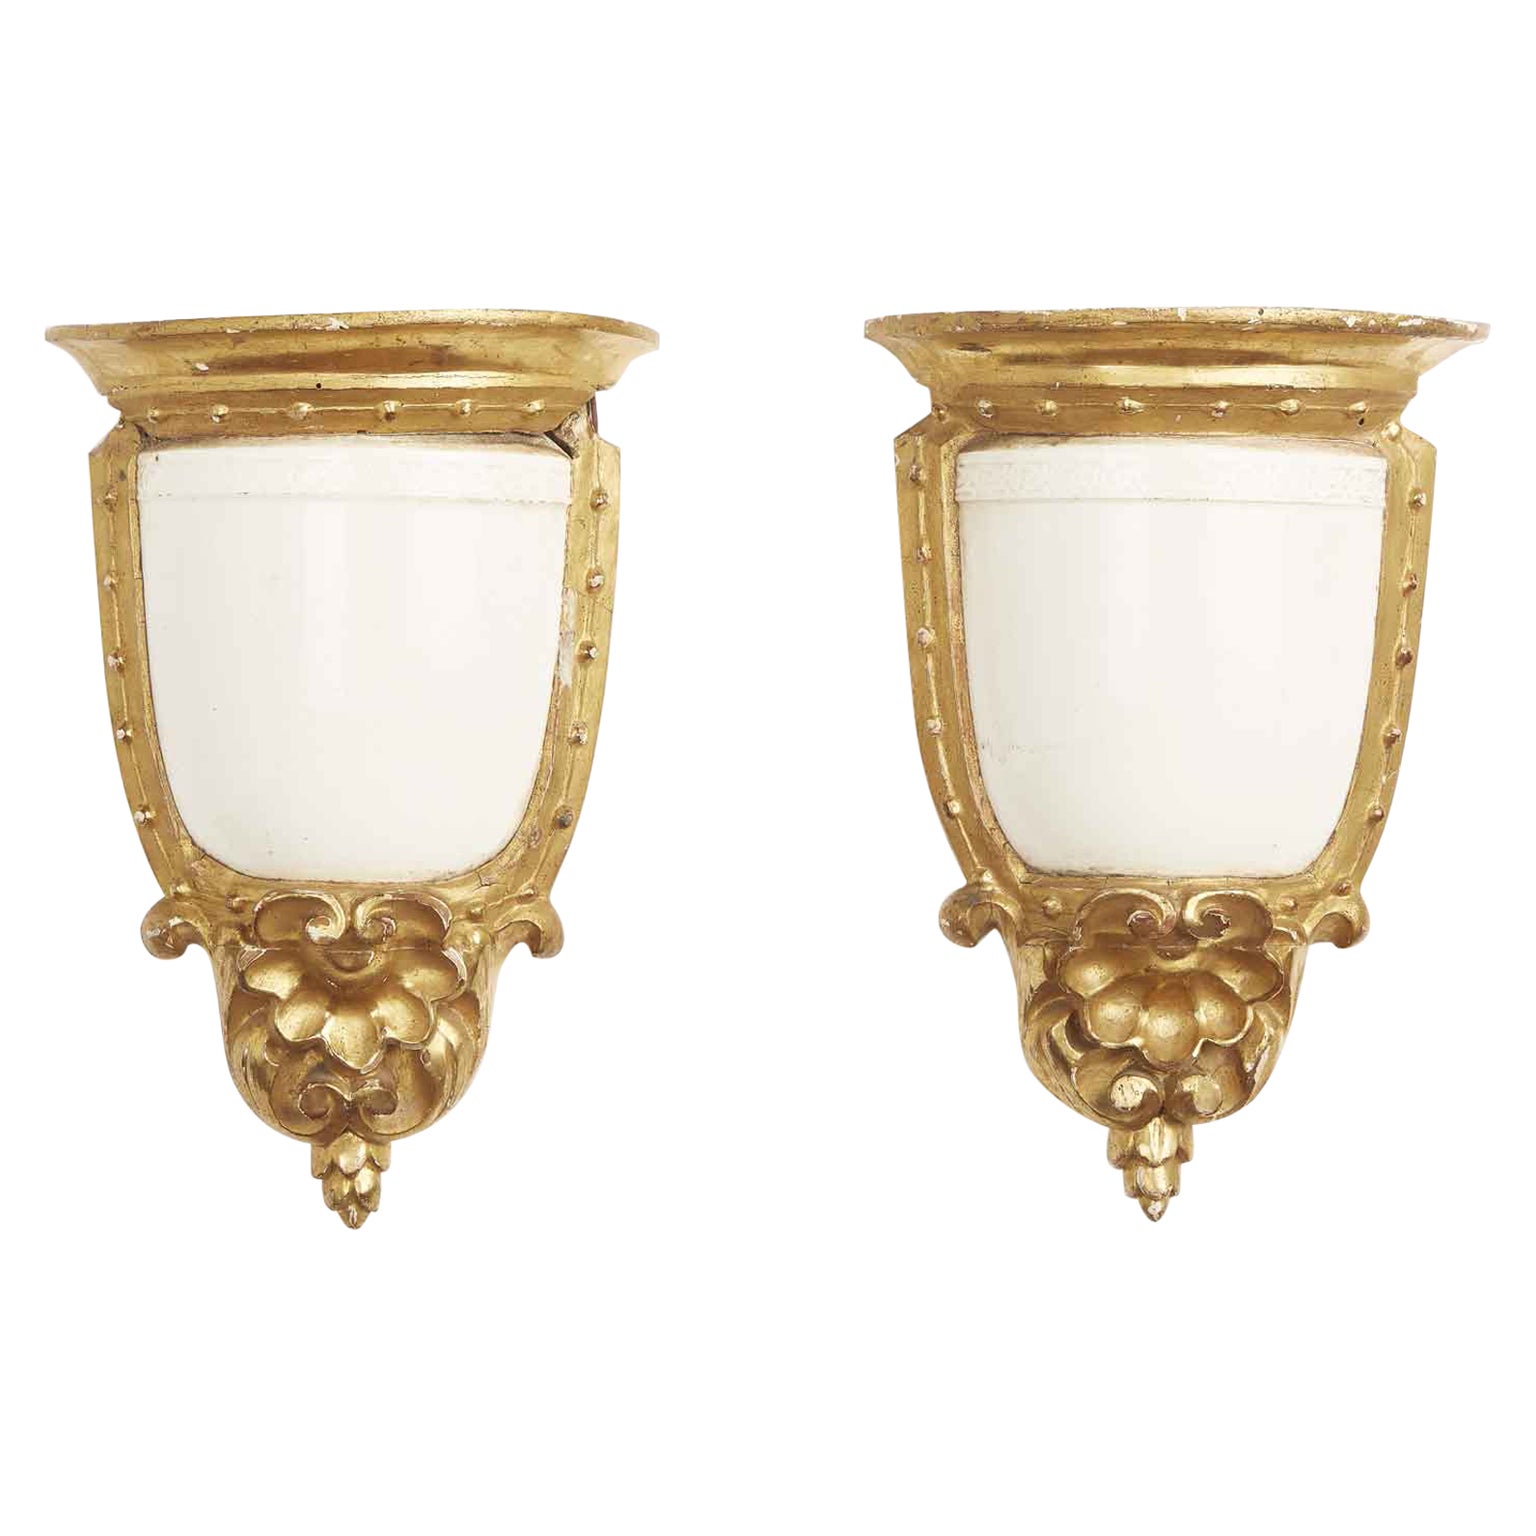 19th Century Italian Neoclassical Majolica Pair of Wall Brackets for Sconces